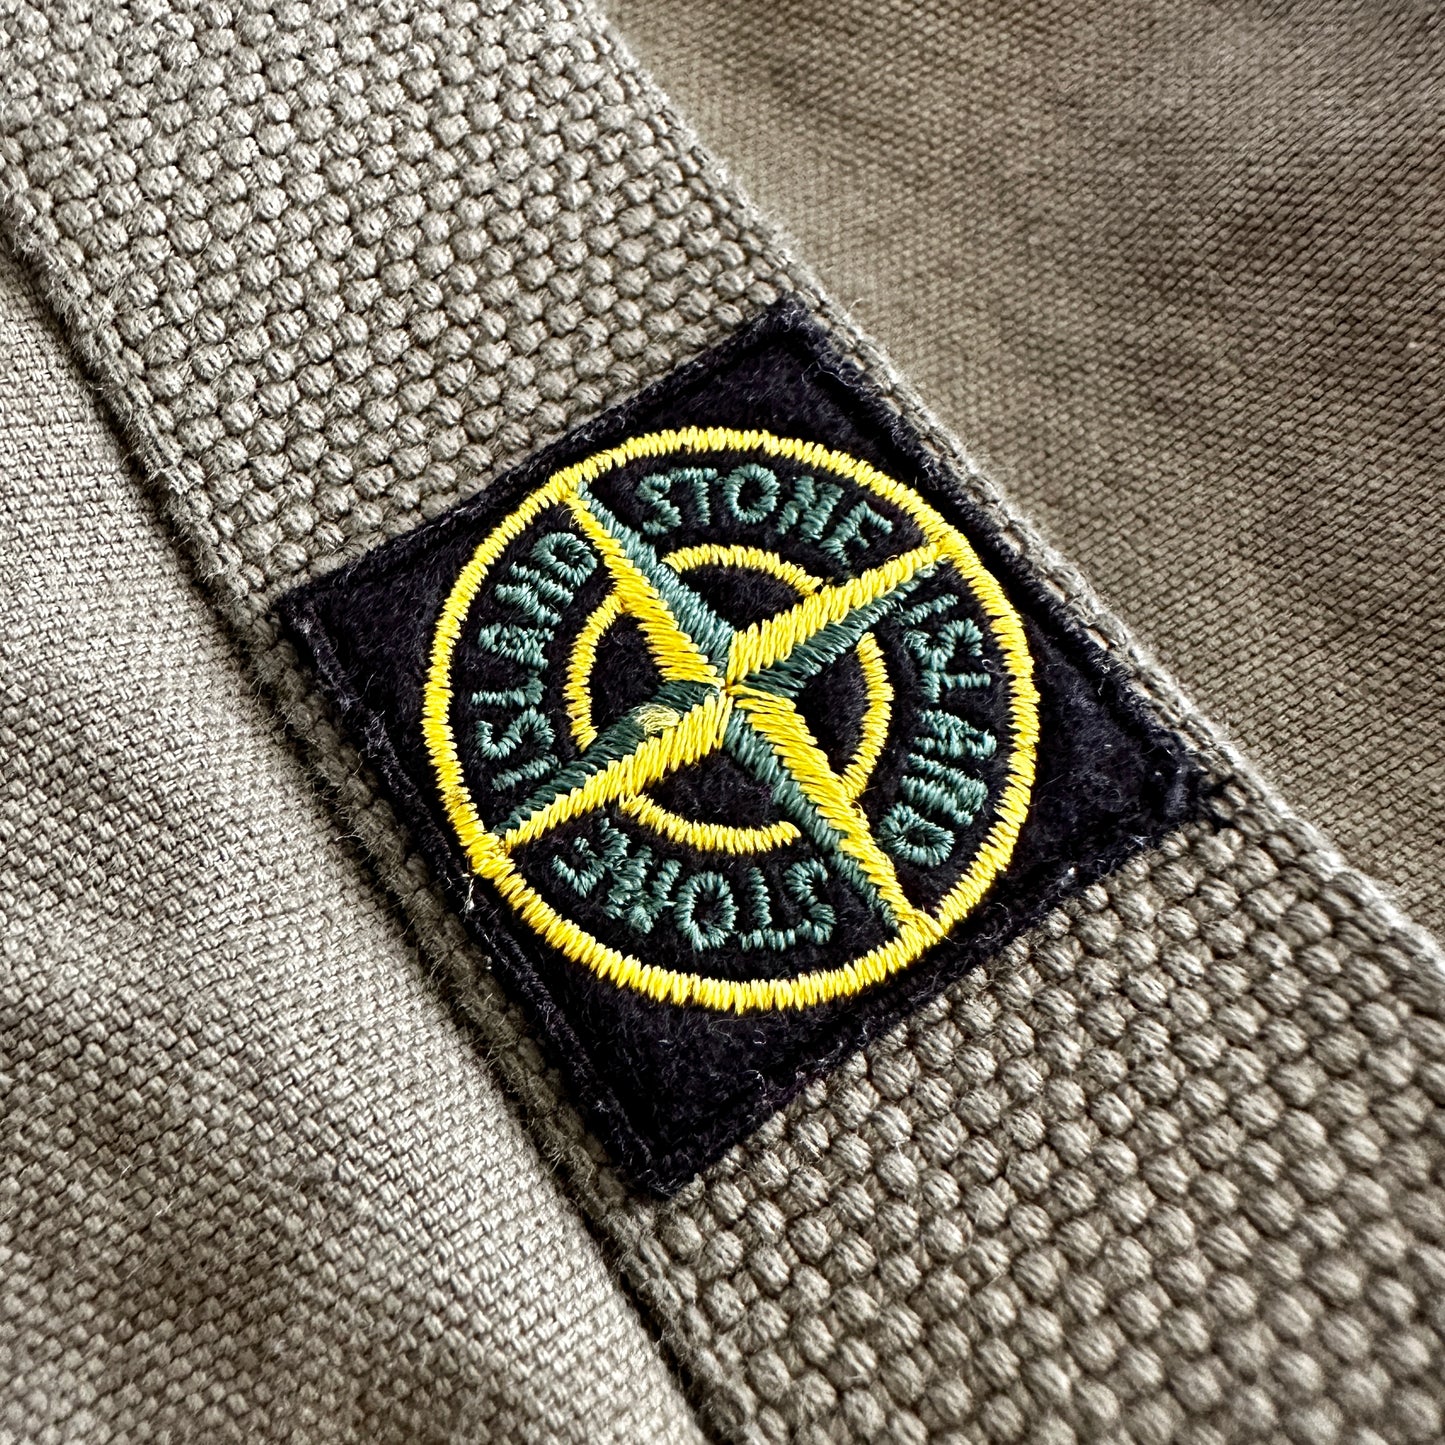 Stone Island 2012 Reflective Rucksack Backpack - Made in Italy